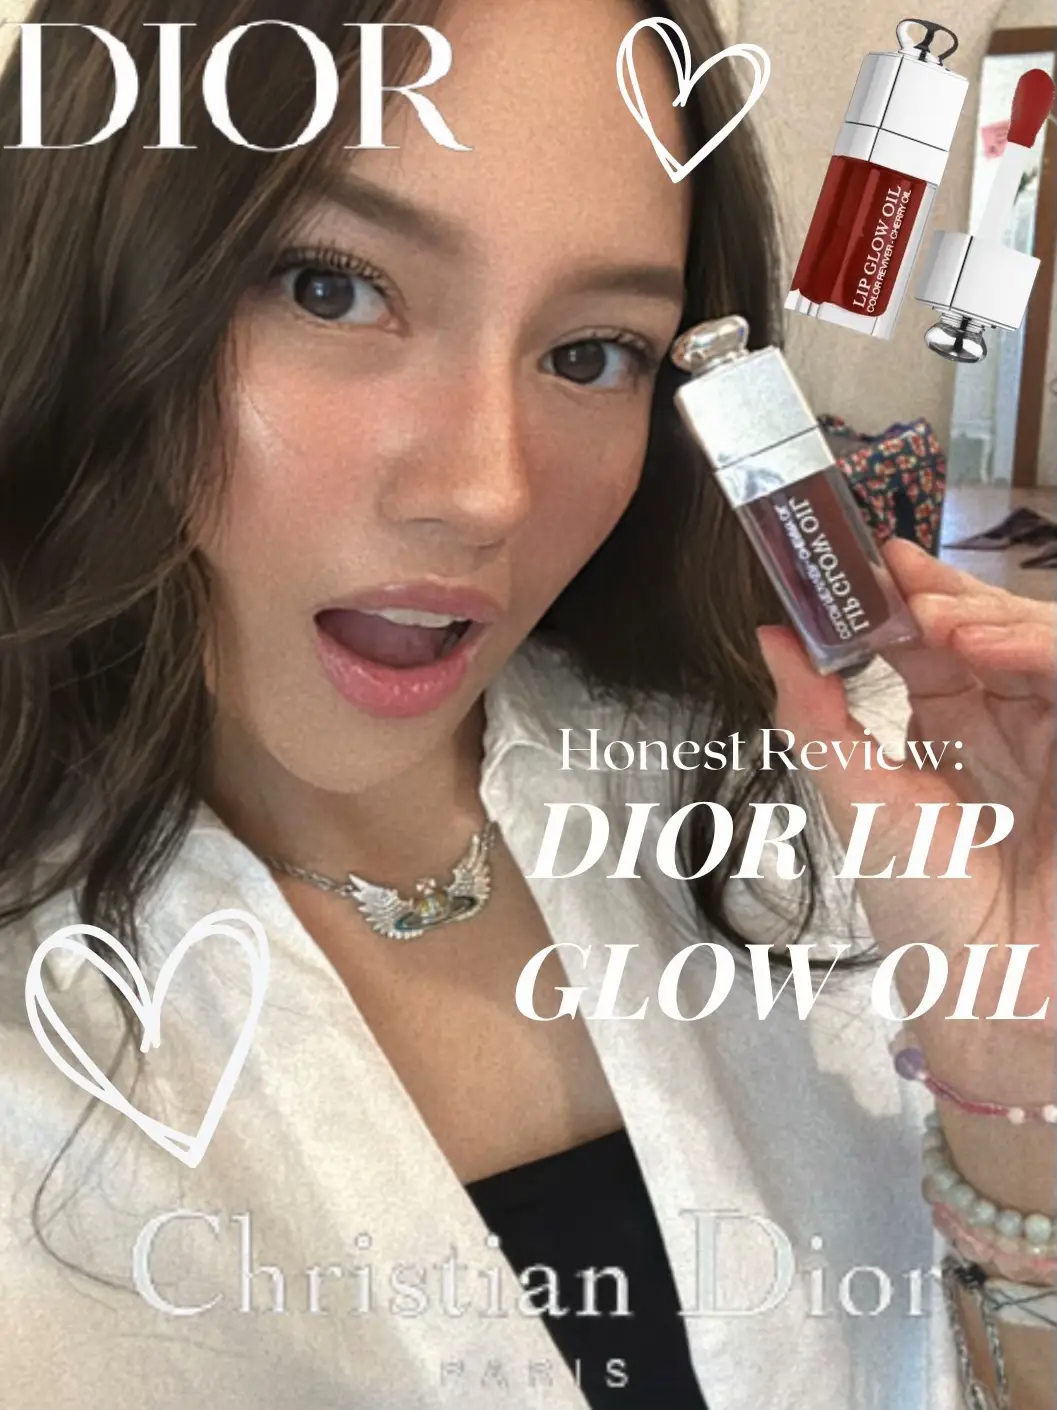 Dior Lip Glow Oil Honest Review  Gallery posted by Nadia Annisa